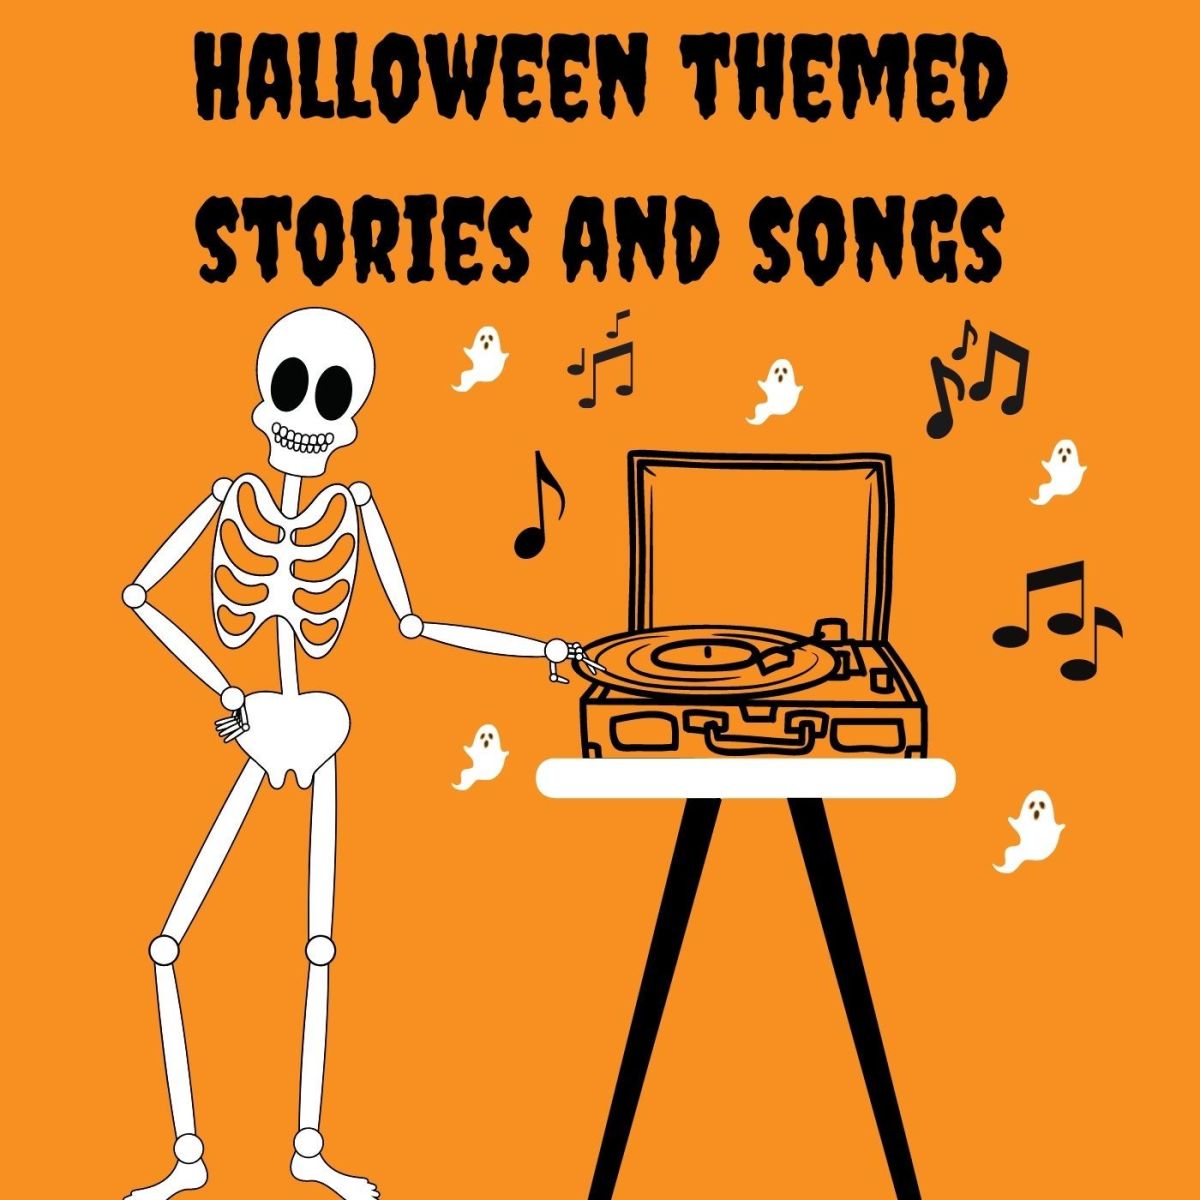 13 Songs for Halloween by Alice Cooper, Neil Young, and Others